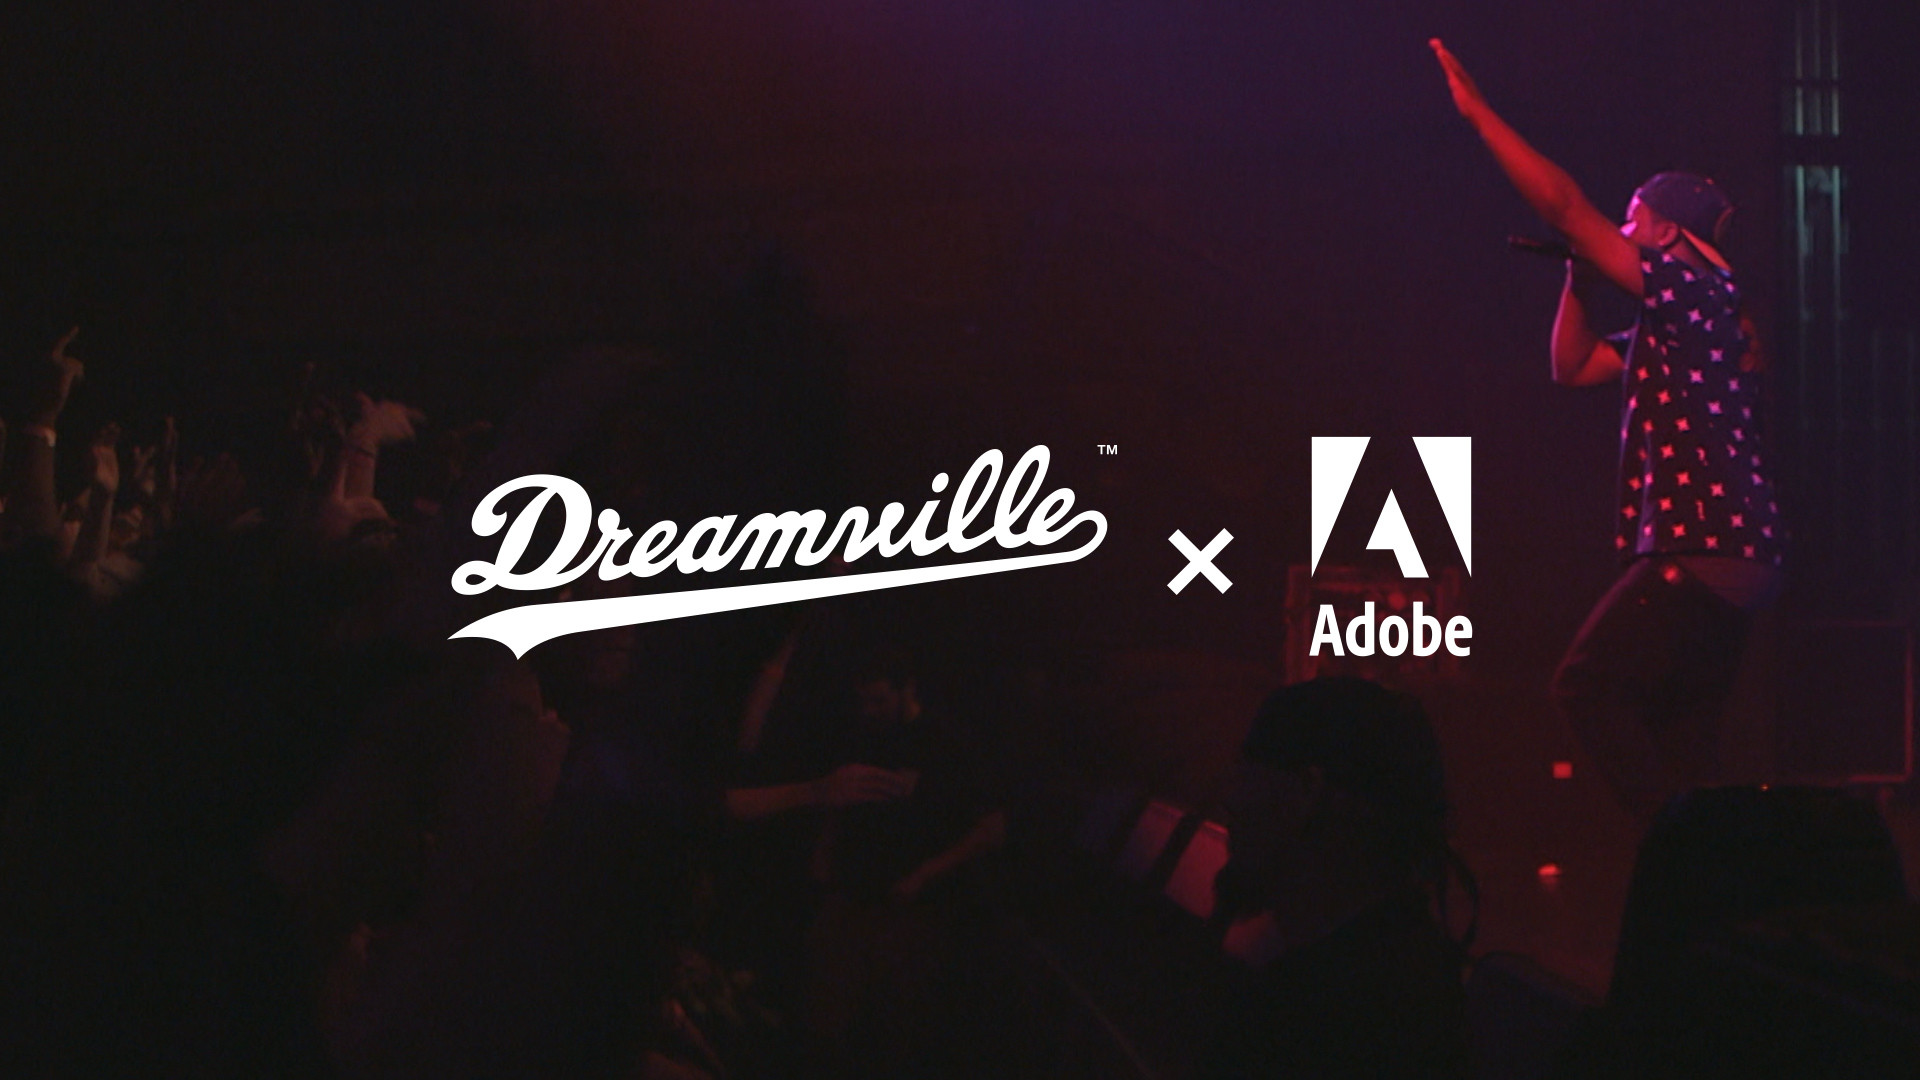 Dreamville x Adobe Behind The Forest Hills Drive Tour Dreamville Records